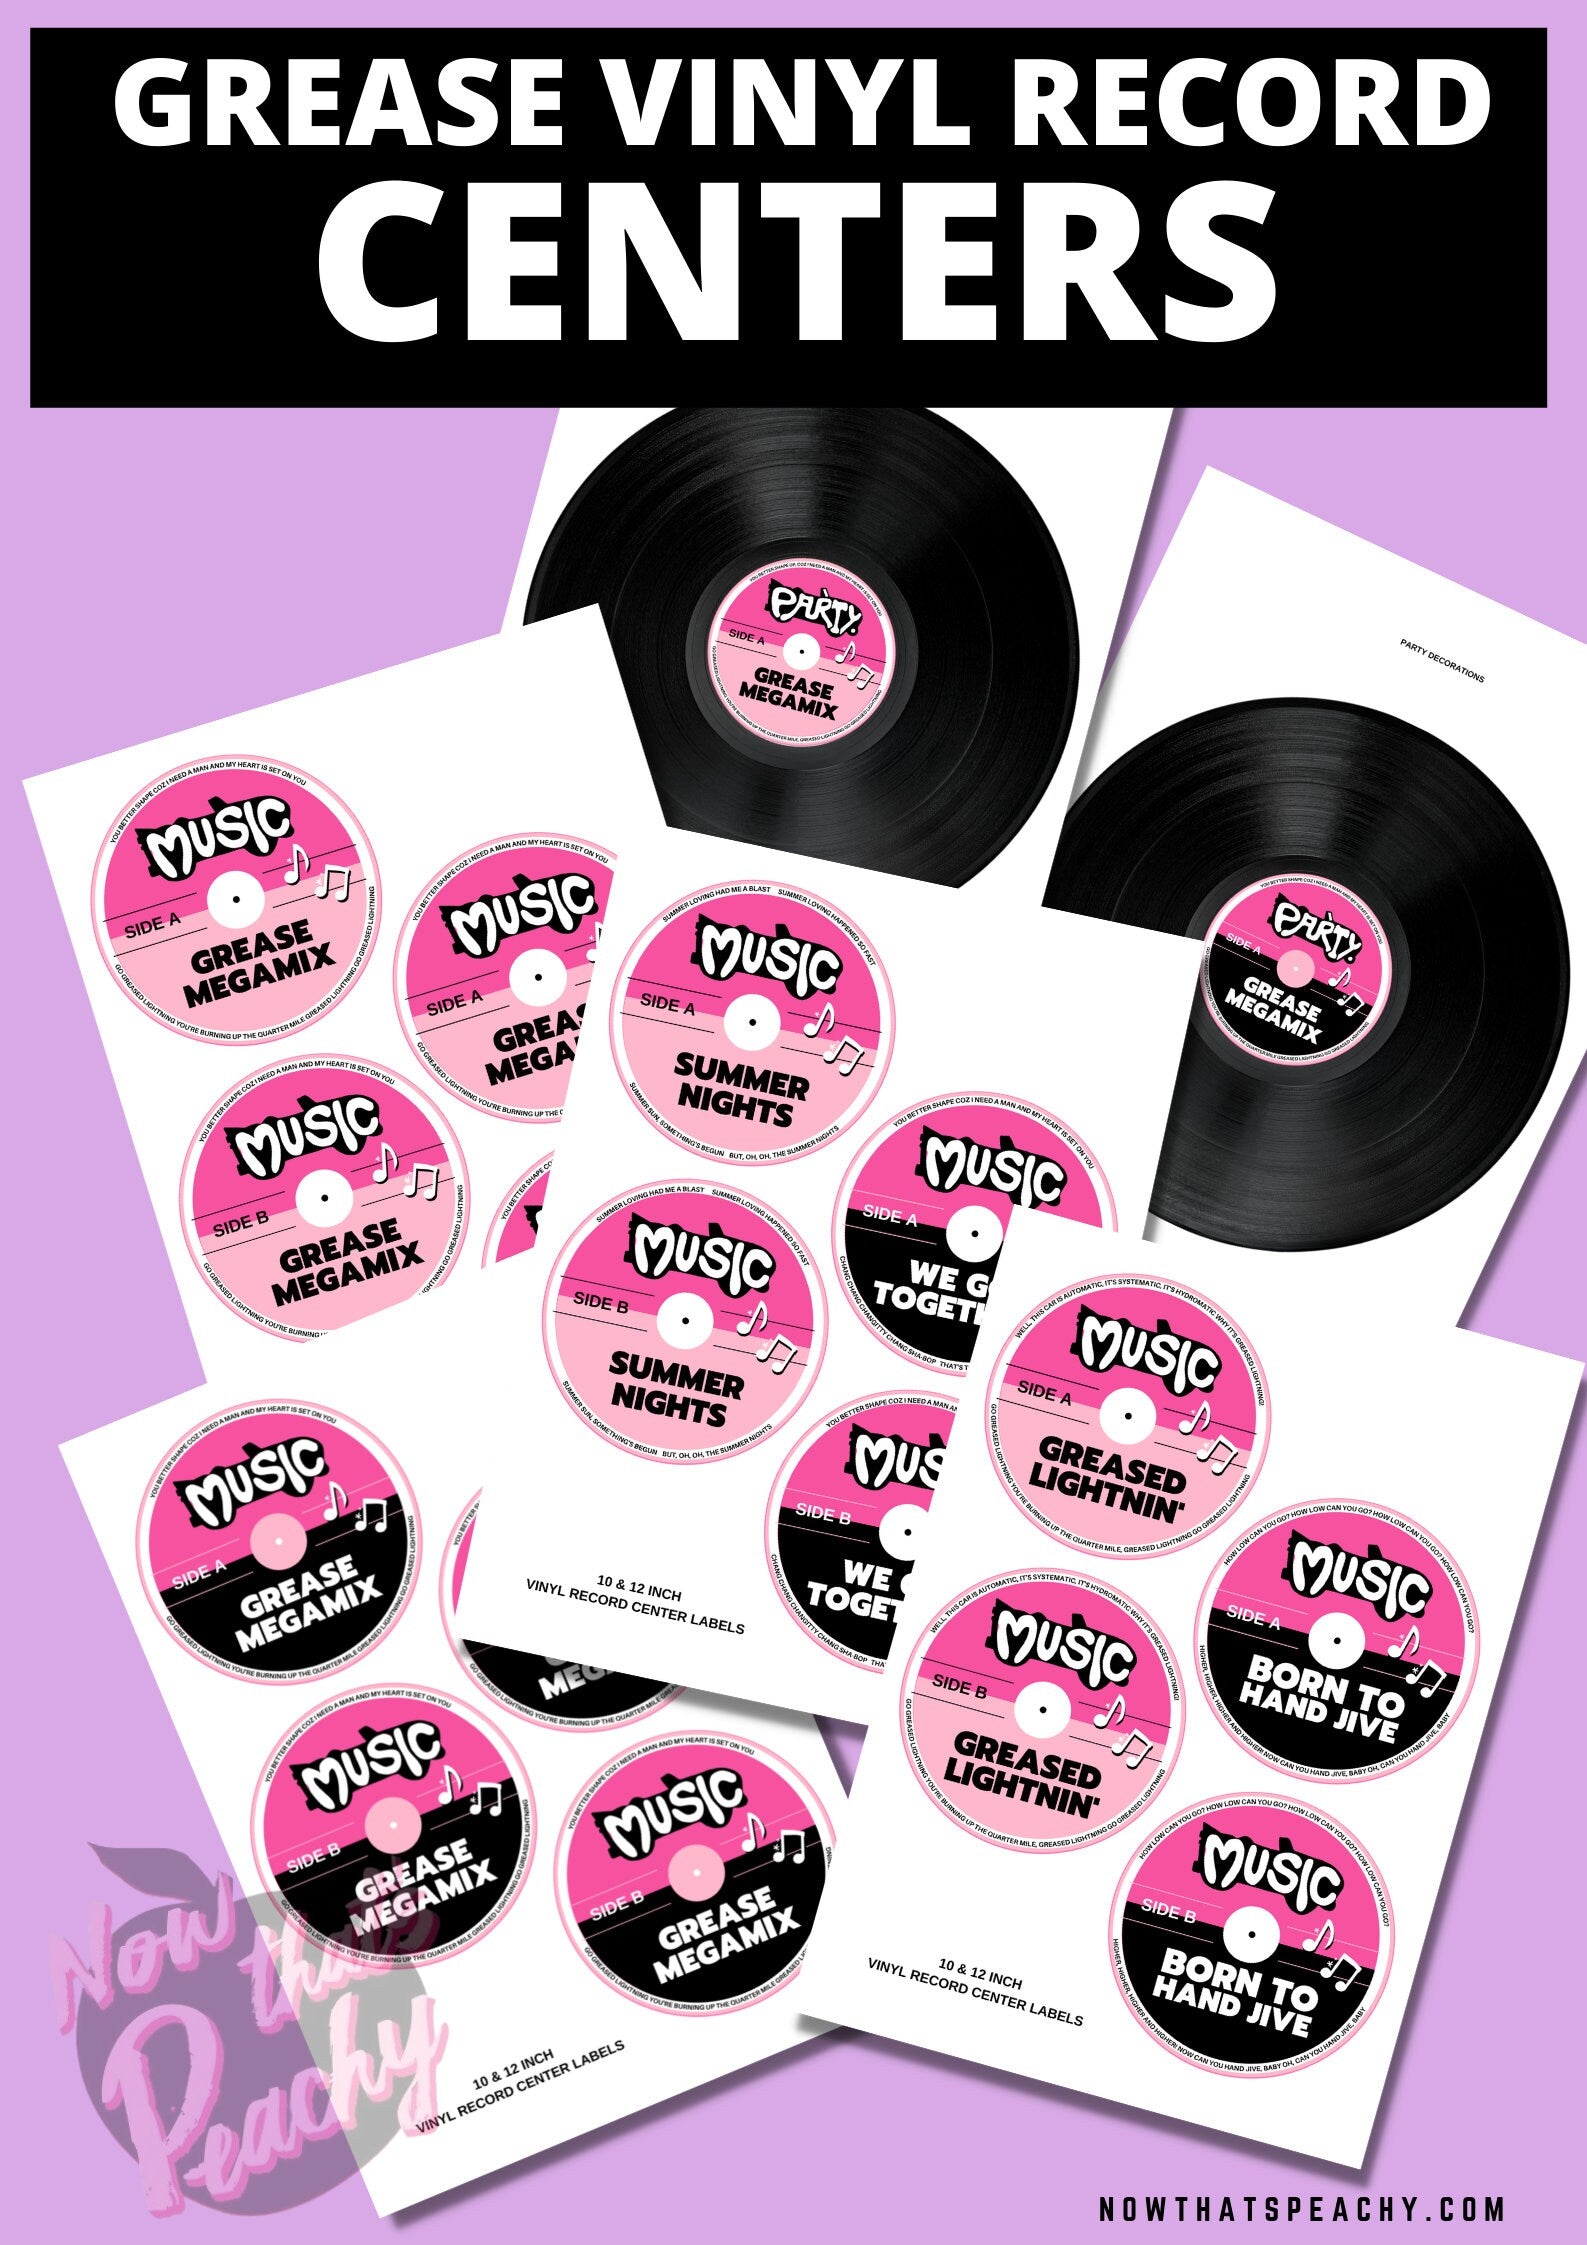 Grease Movie party vinyl record circle sticker center print off decorations 1950s fifties 50's printable template digital instant download edit Danny Sandy T-birds Pink Ladies invite soda hop jukebox rockabilly rock'n'roll musical movie design pink black white modern color fun themed bachelorette birthday charity fundraiser event decor